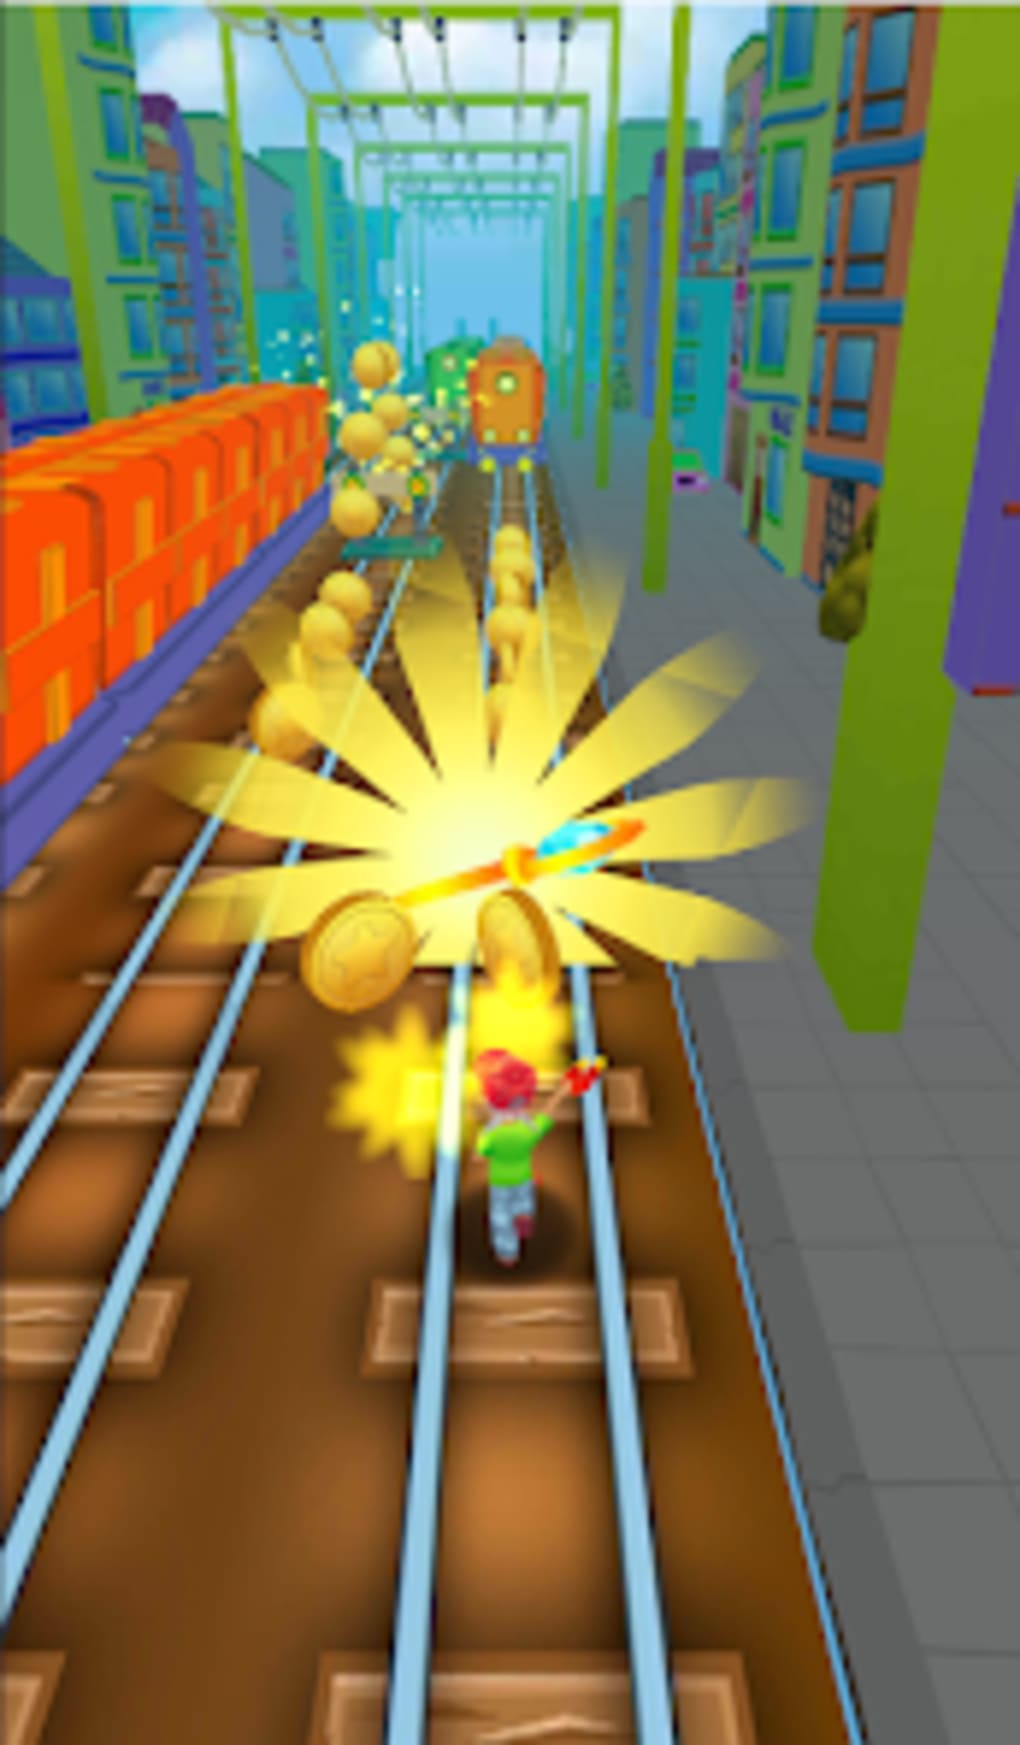 Subway Runner - Bus Rush Hours Game for Android - Download